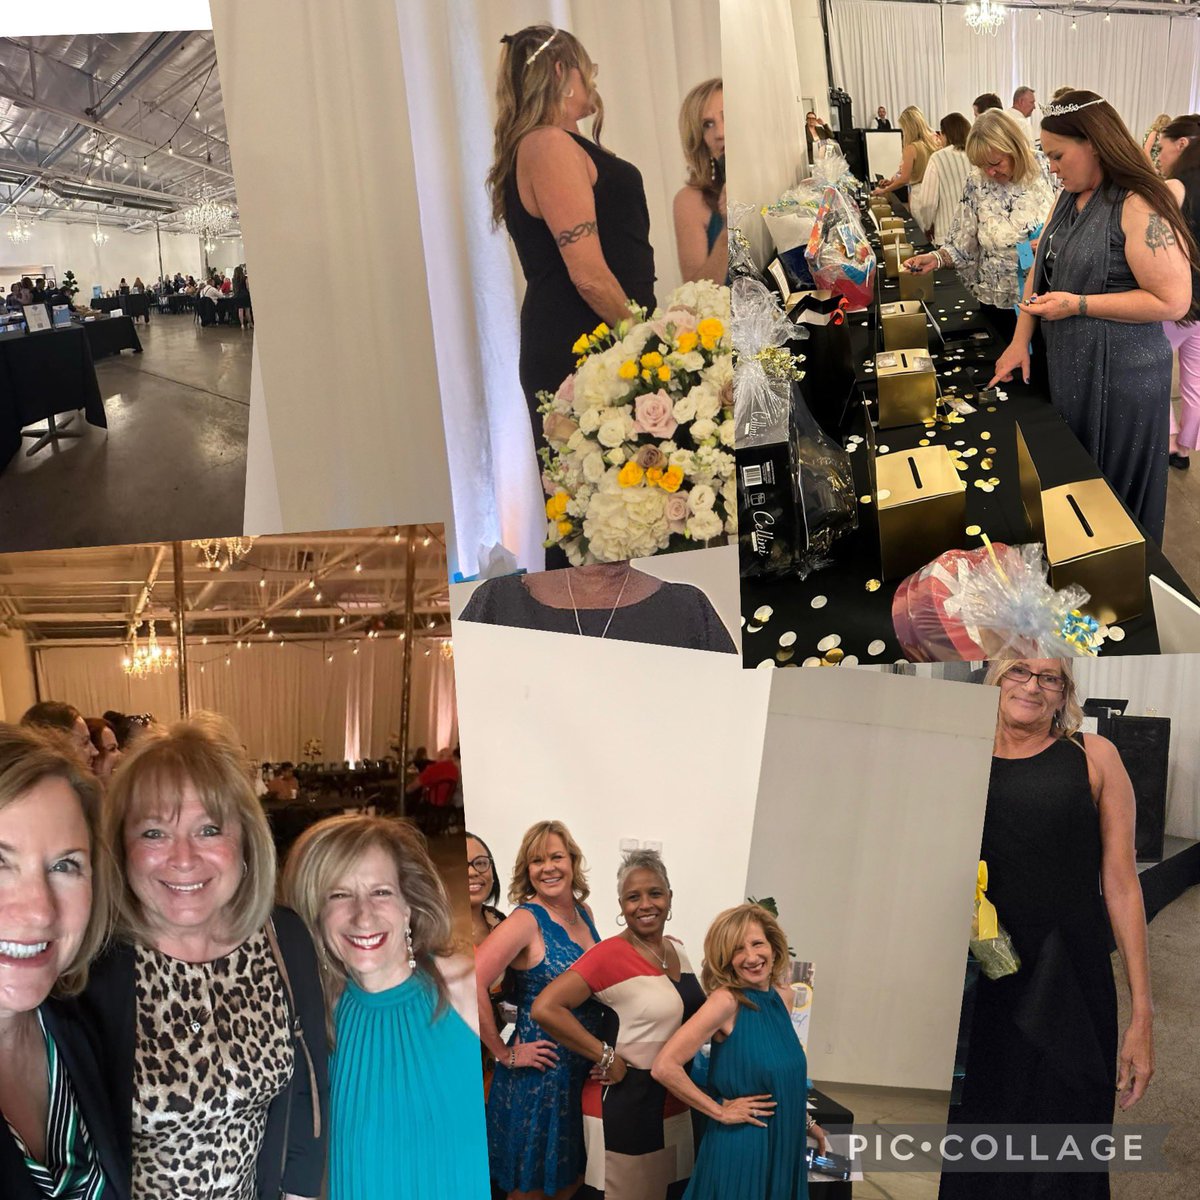 A few scenes from the fabulous “Once Upon a Second Chance” @Arouetforgood @TeleverdeF @dfsphoenix! A fantastic evening celebrating amazing powerful women. #FairChances #powerfulwomen